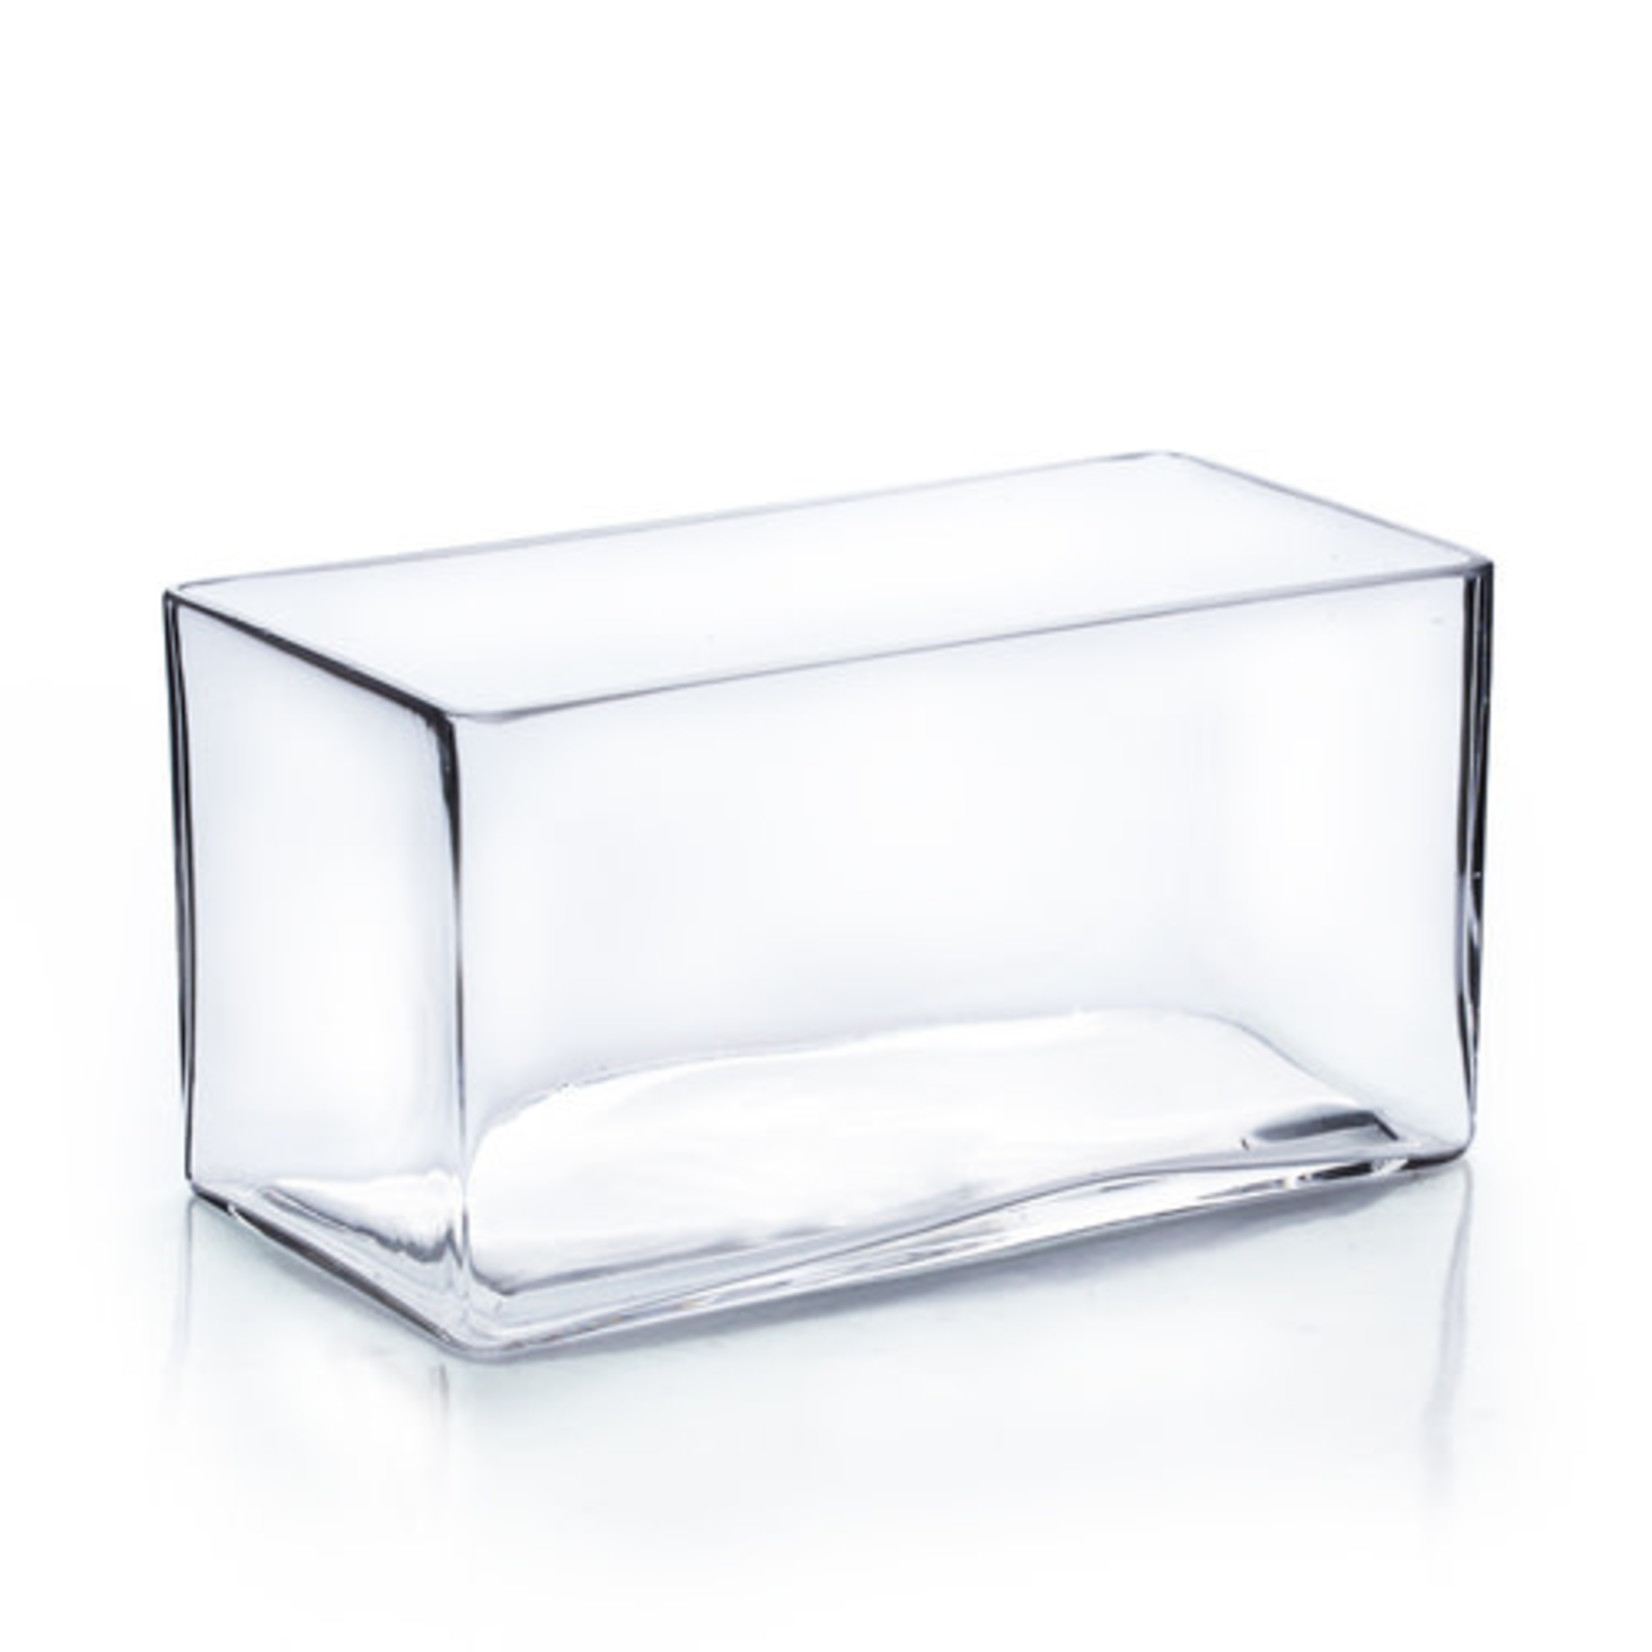 4"H X 8" X 4" LOW RECTANGLE GLASS VASE